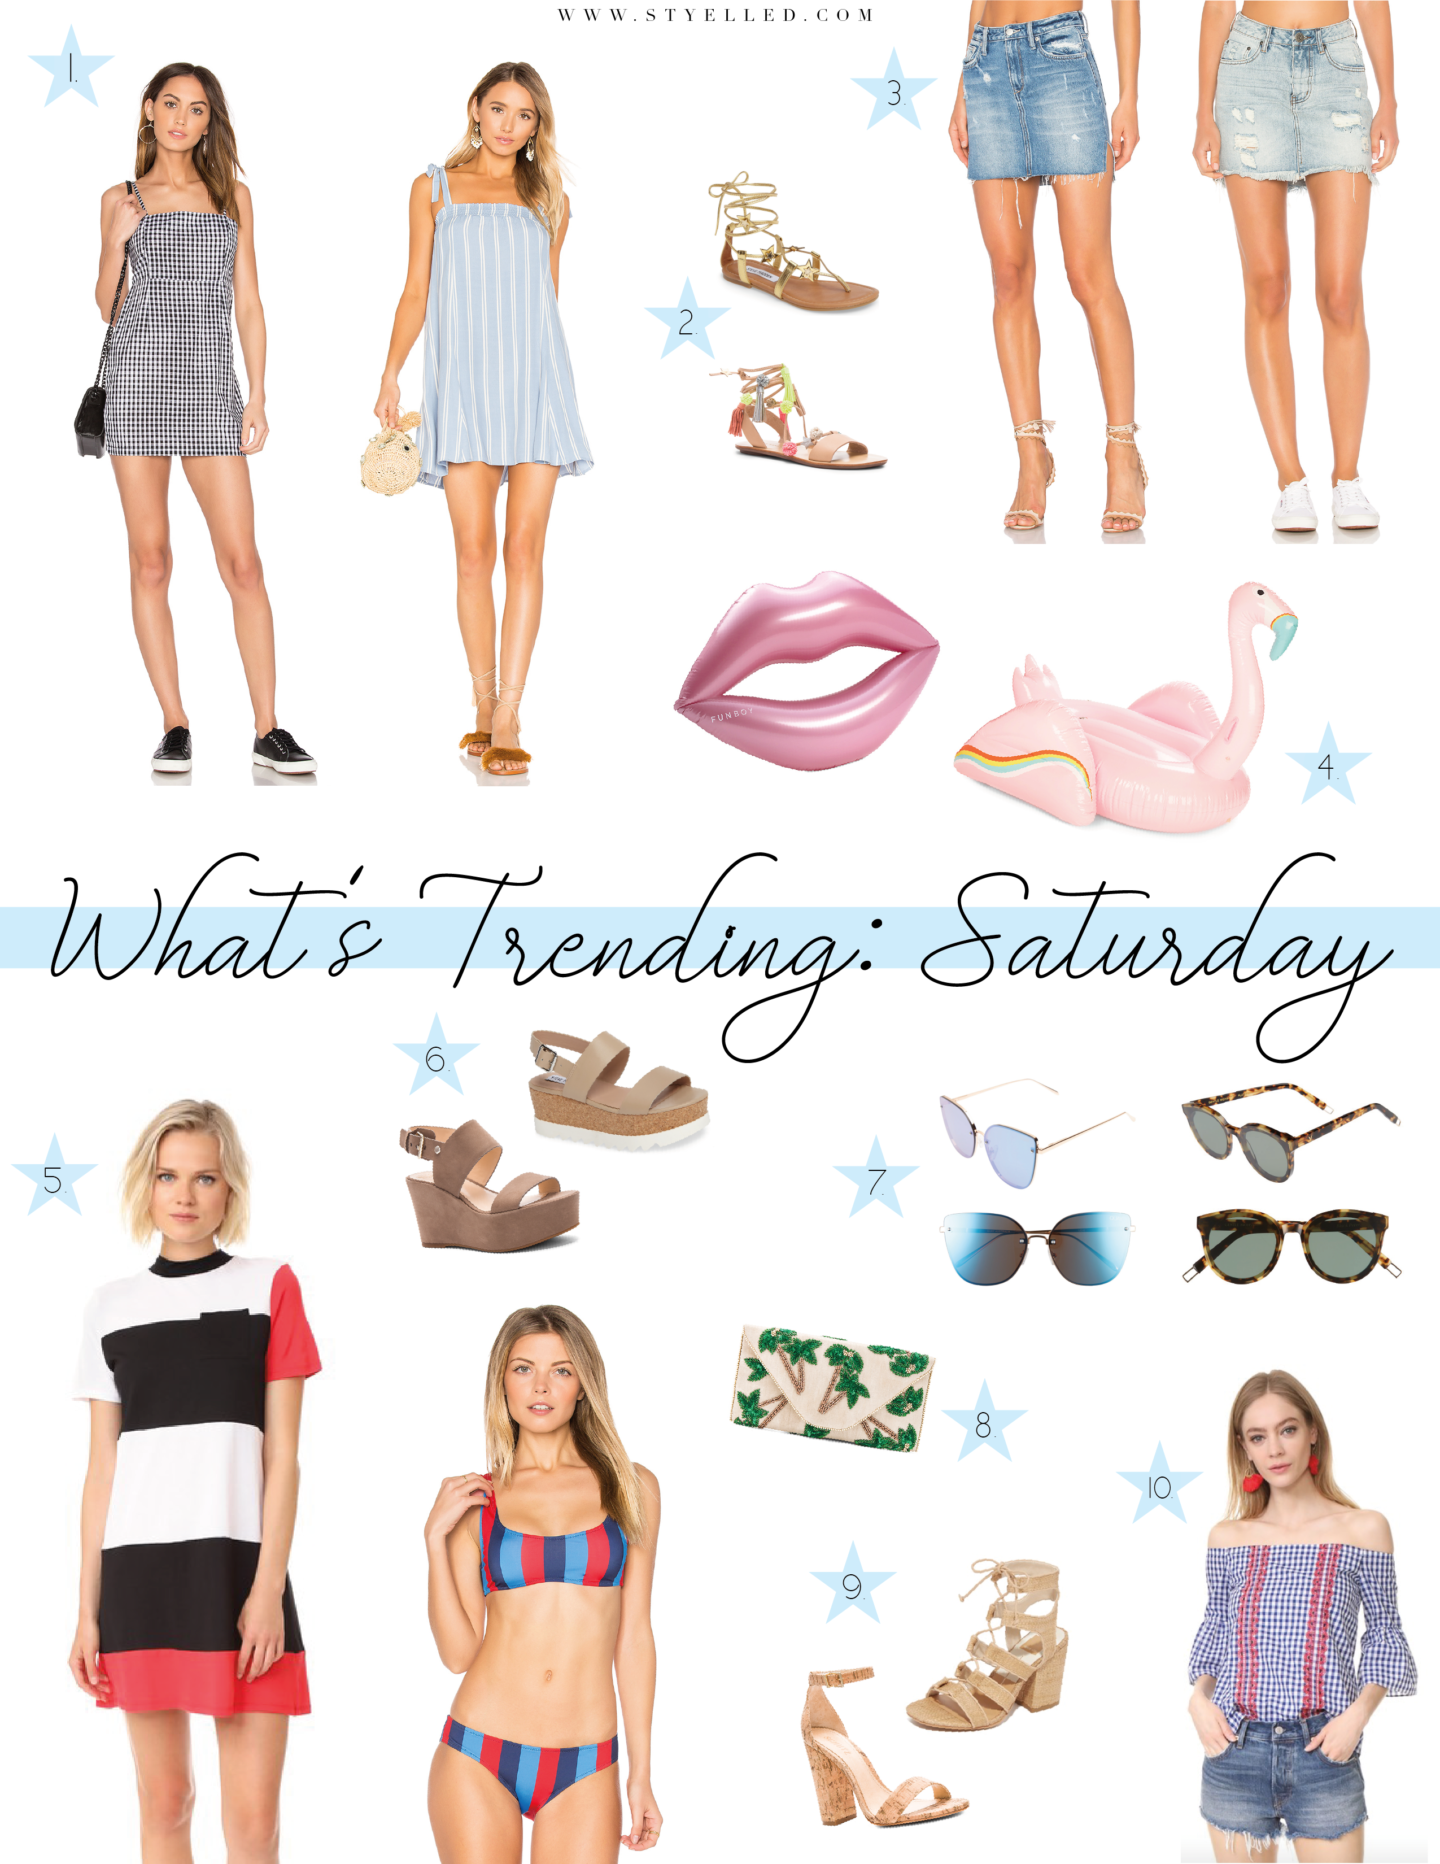 What’s Trending: Saturday Fashion Finds